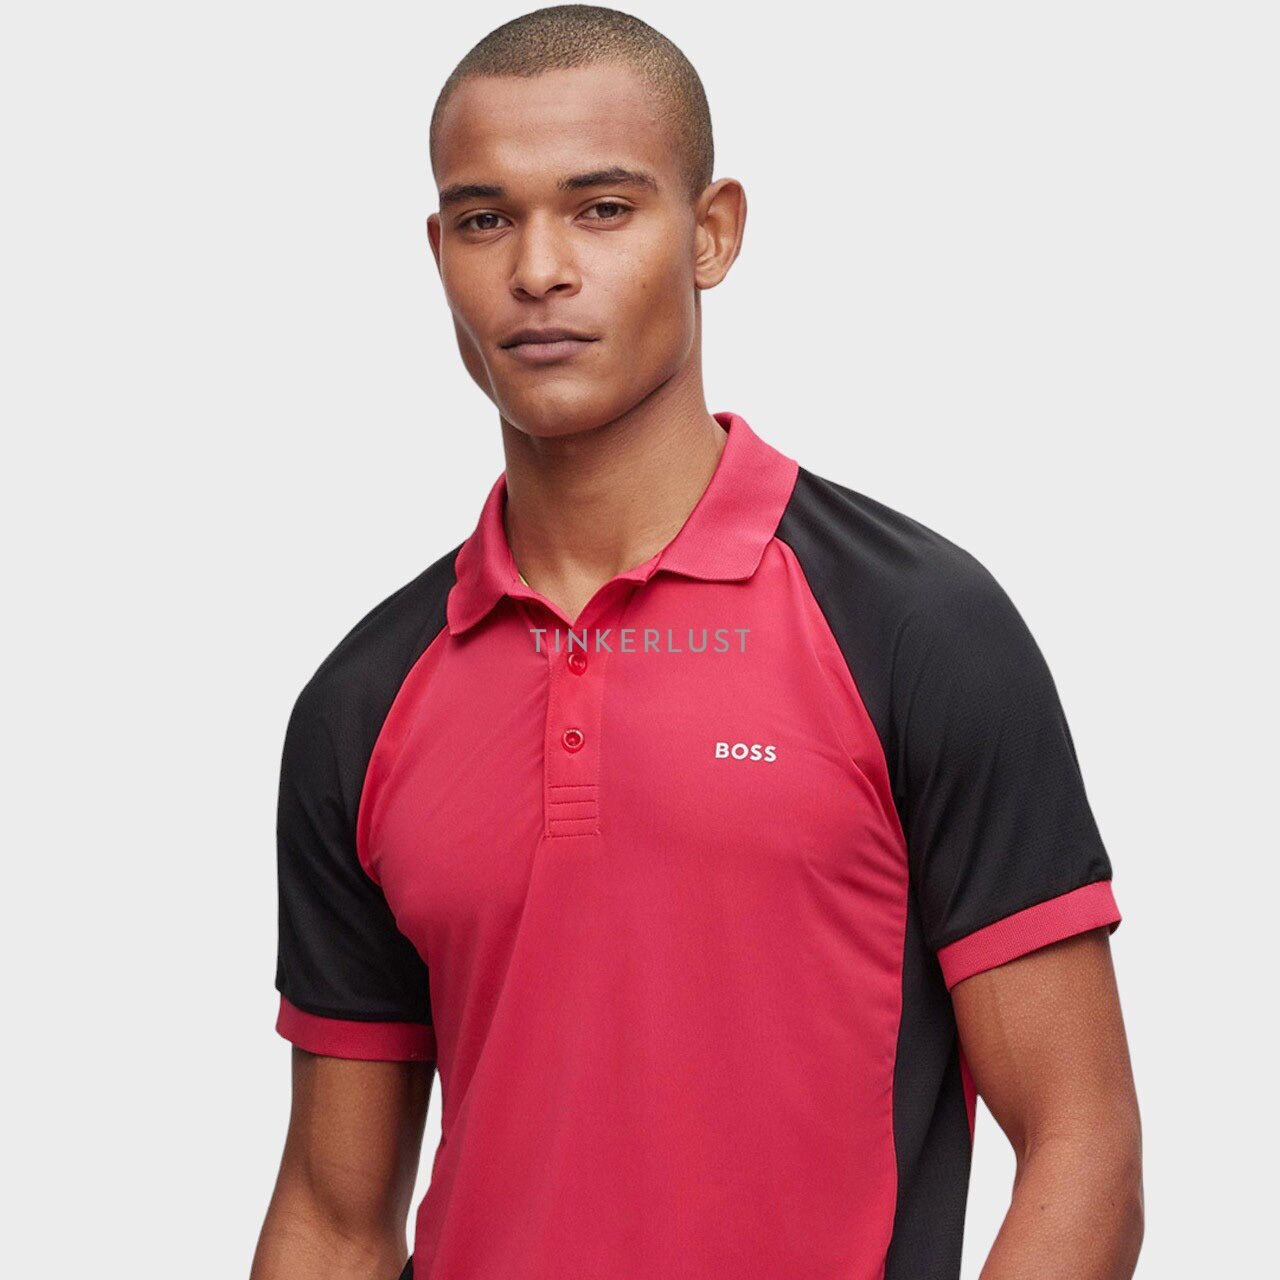 Hugo Boss Men Pauletech Performance-Stretch Slim Fit Polo Shirt in Pink/Black with Colour-Blocking